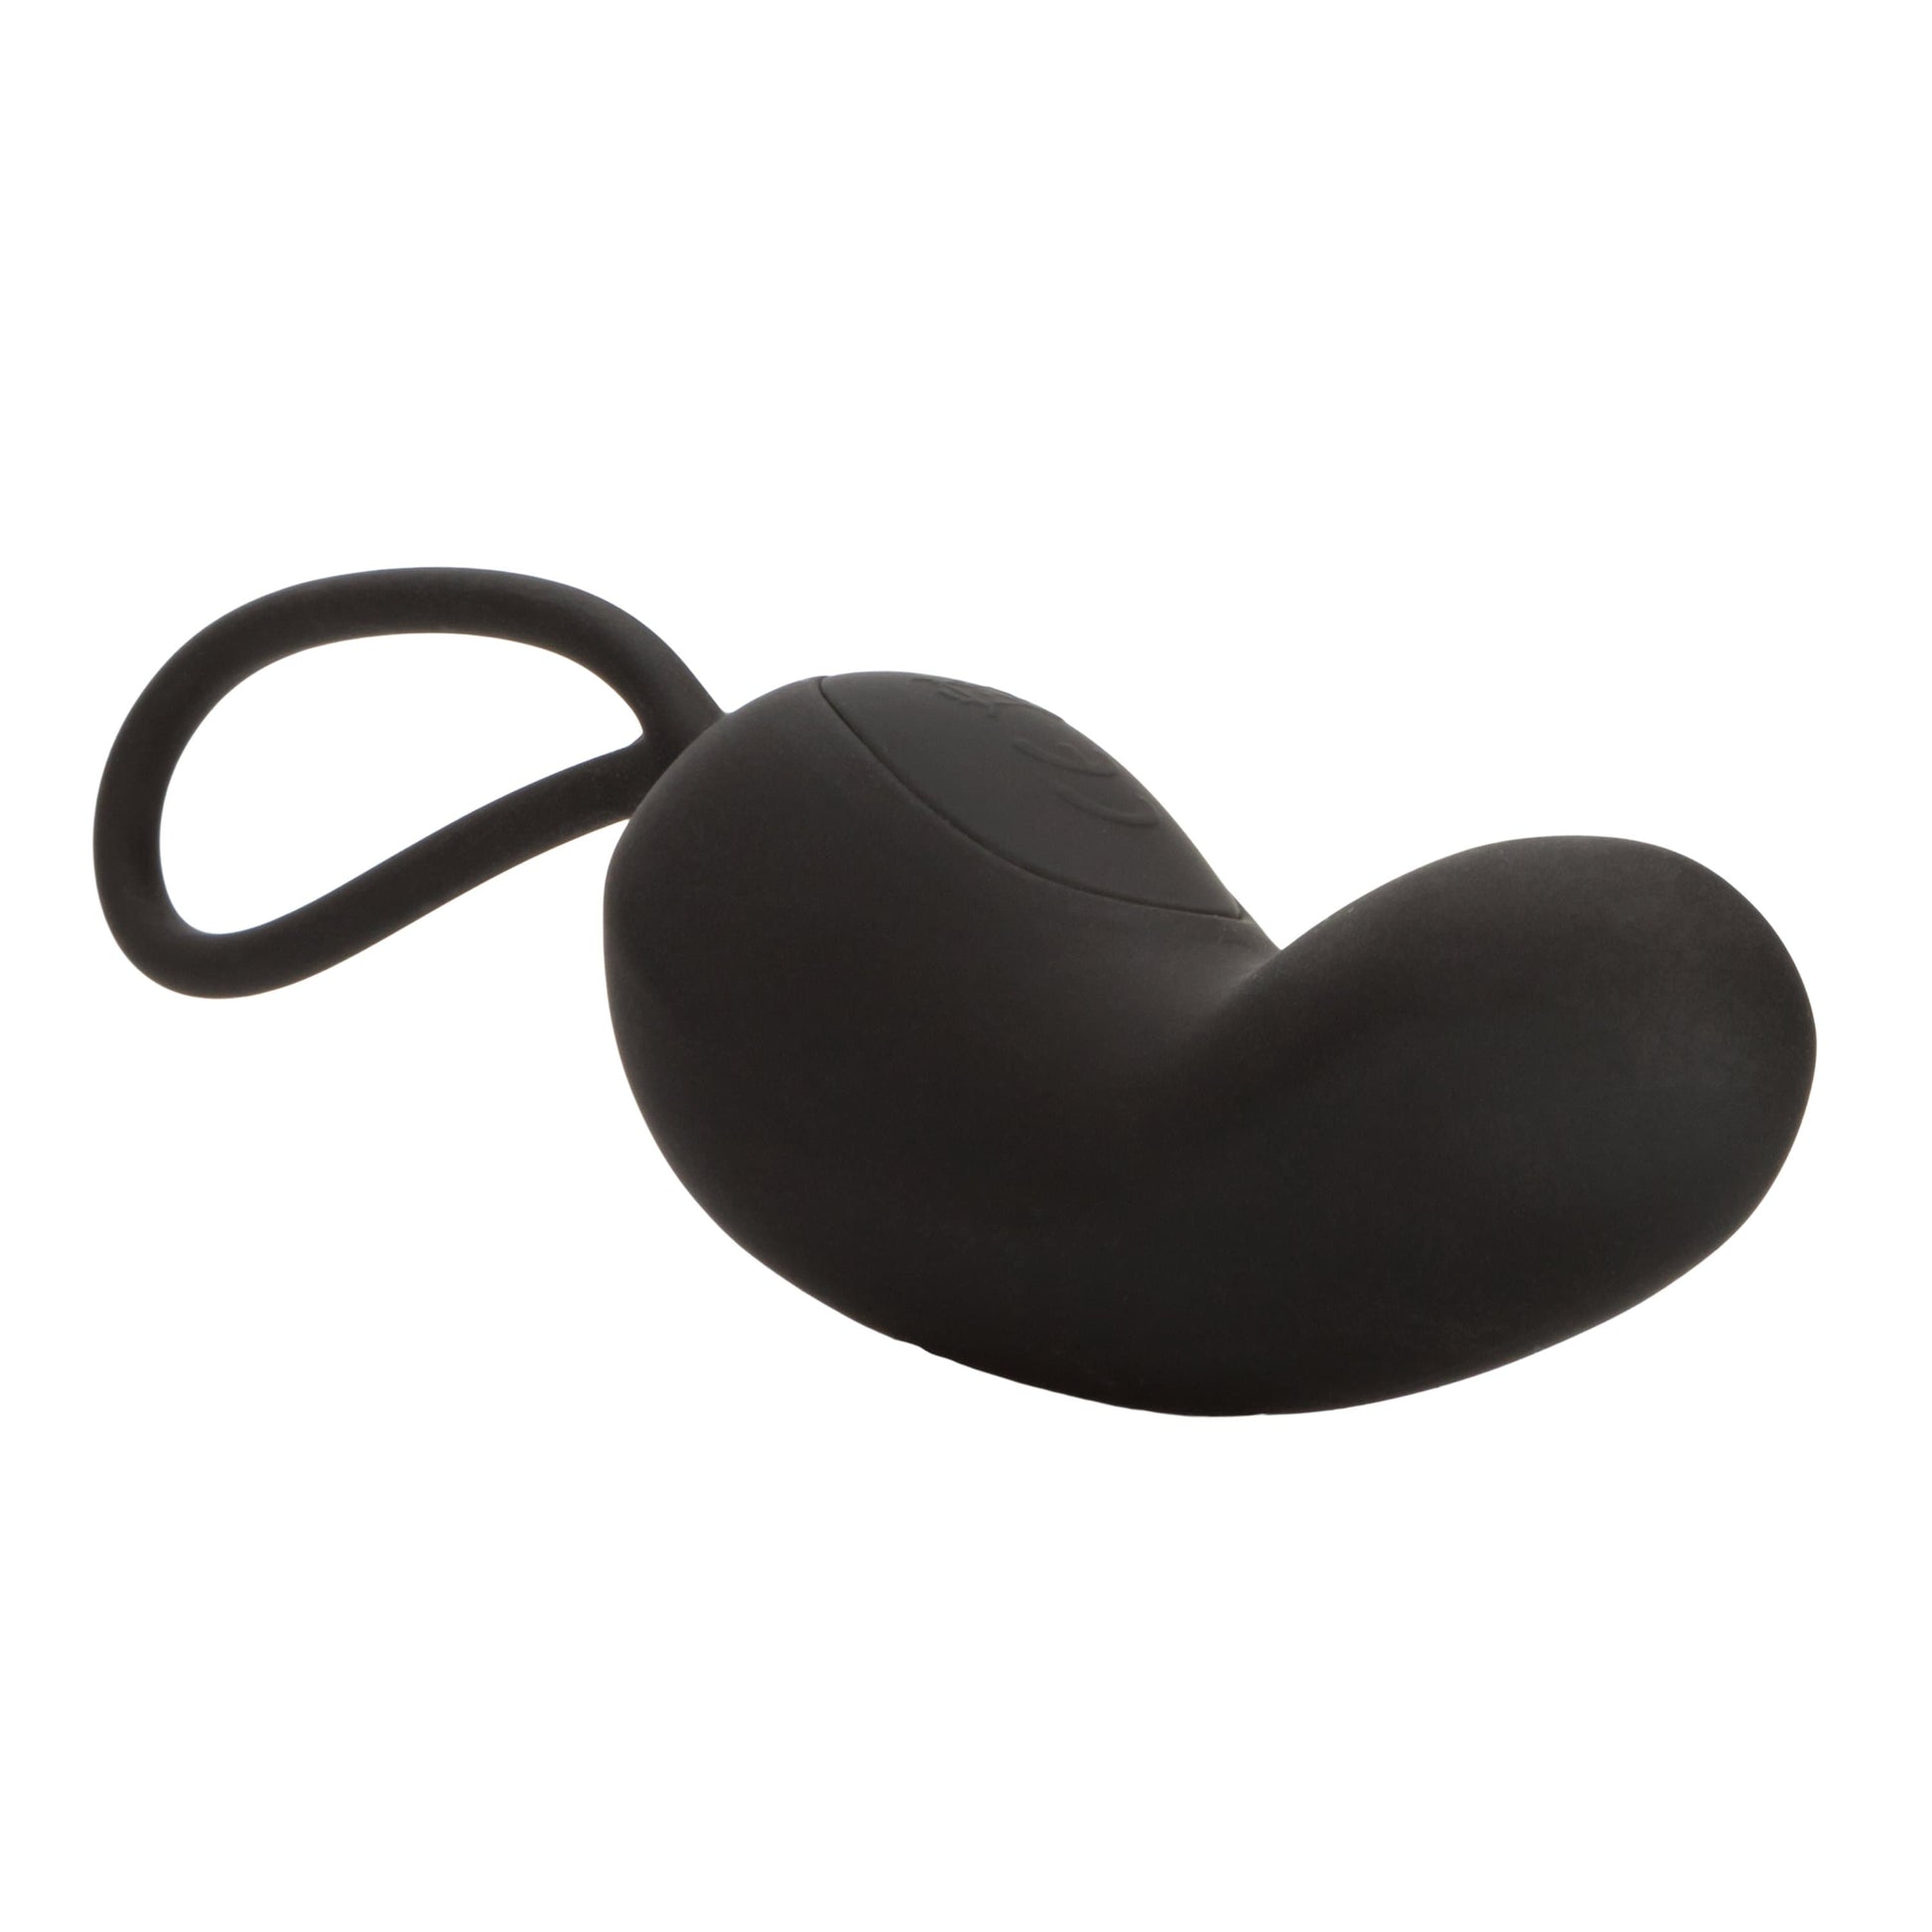 Wristband Remote Curve - Thorn & Feather Sex Toy Canada